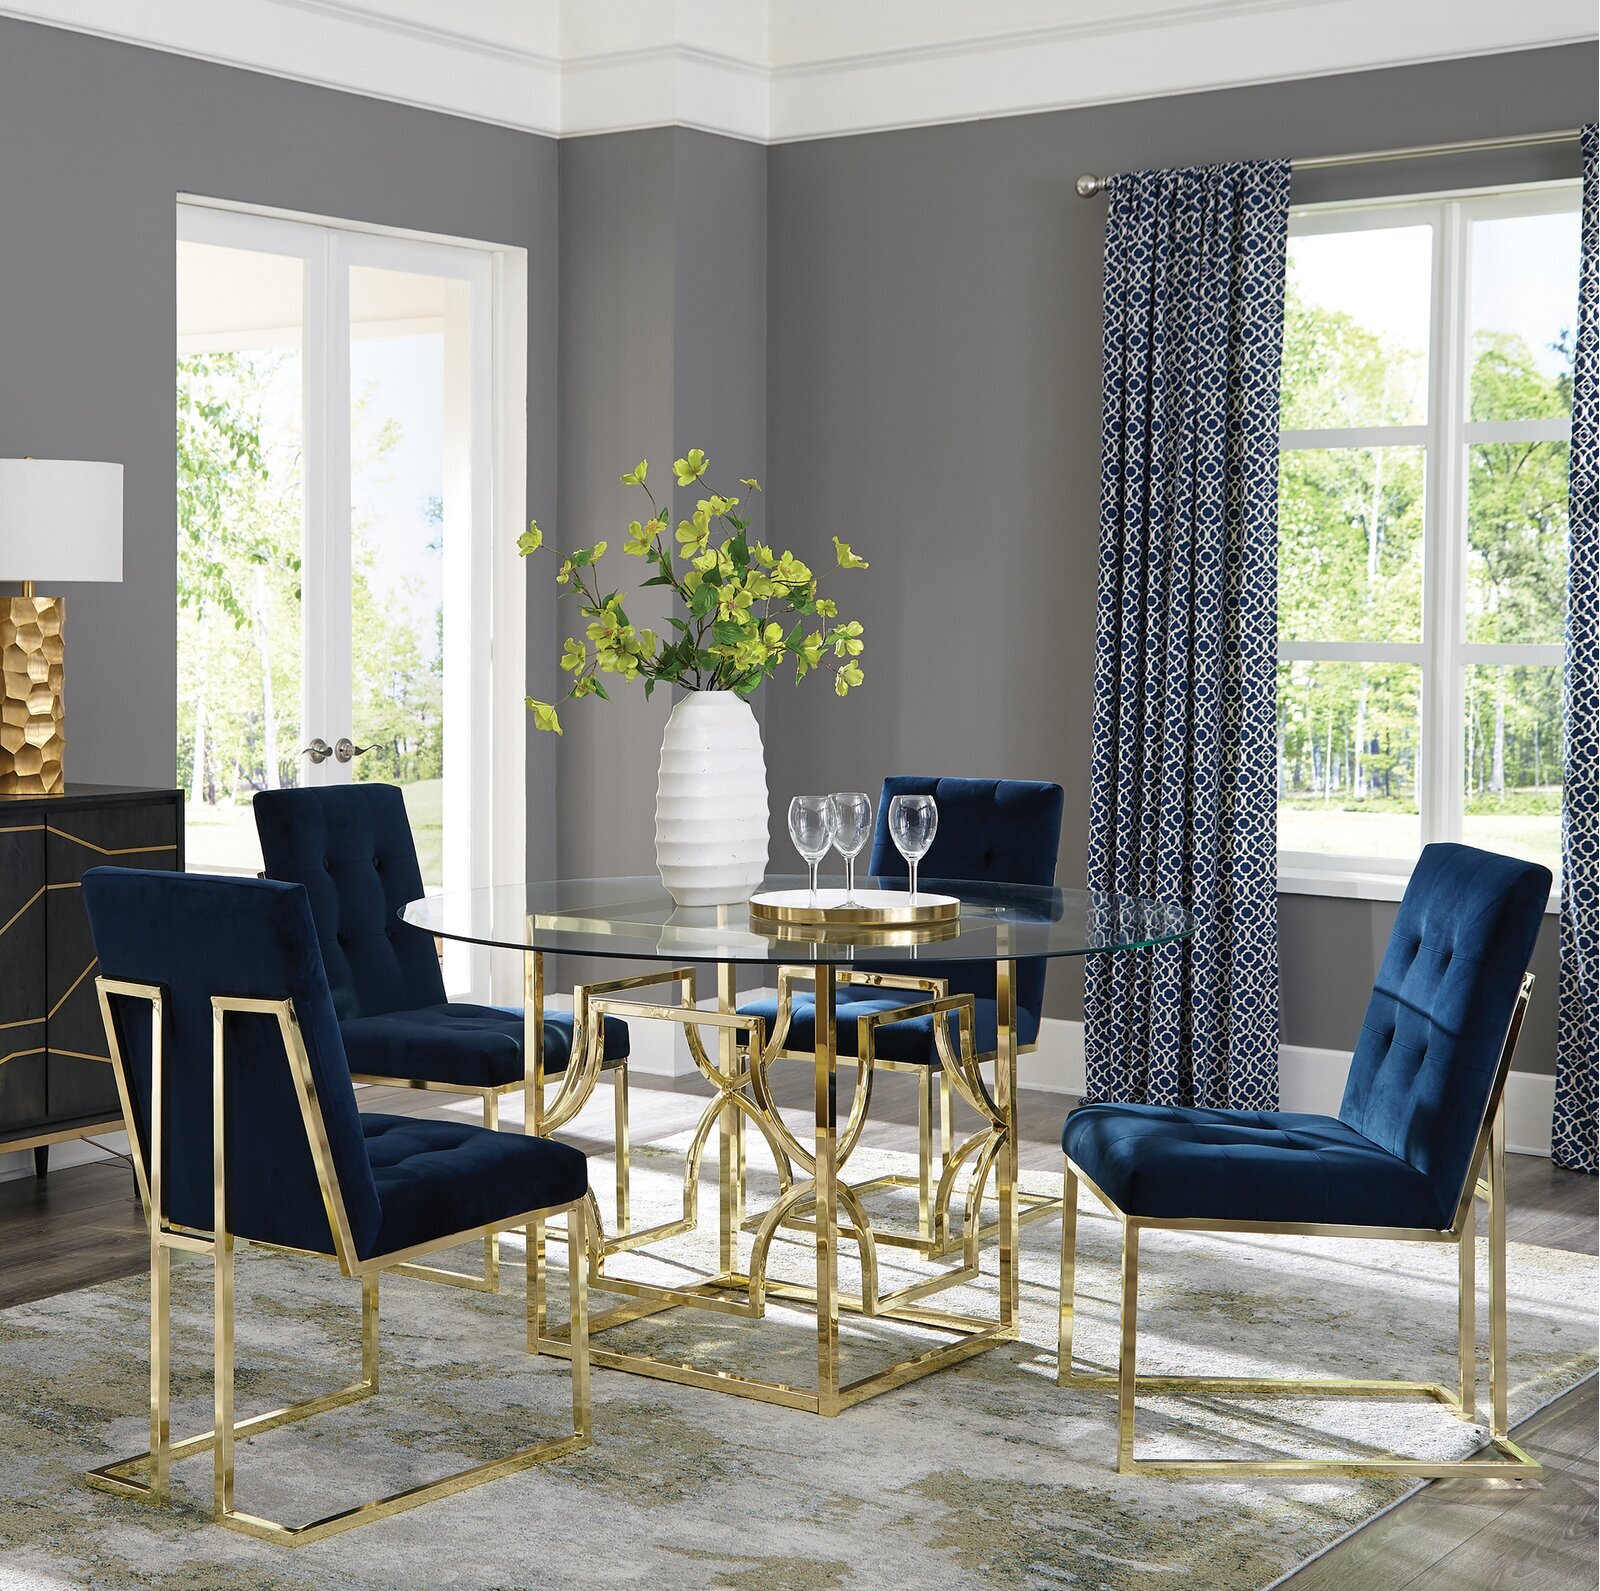 Luxurious glass dining table ensemble with gold details